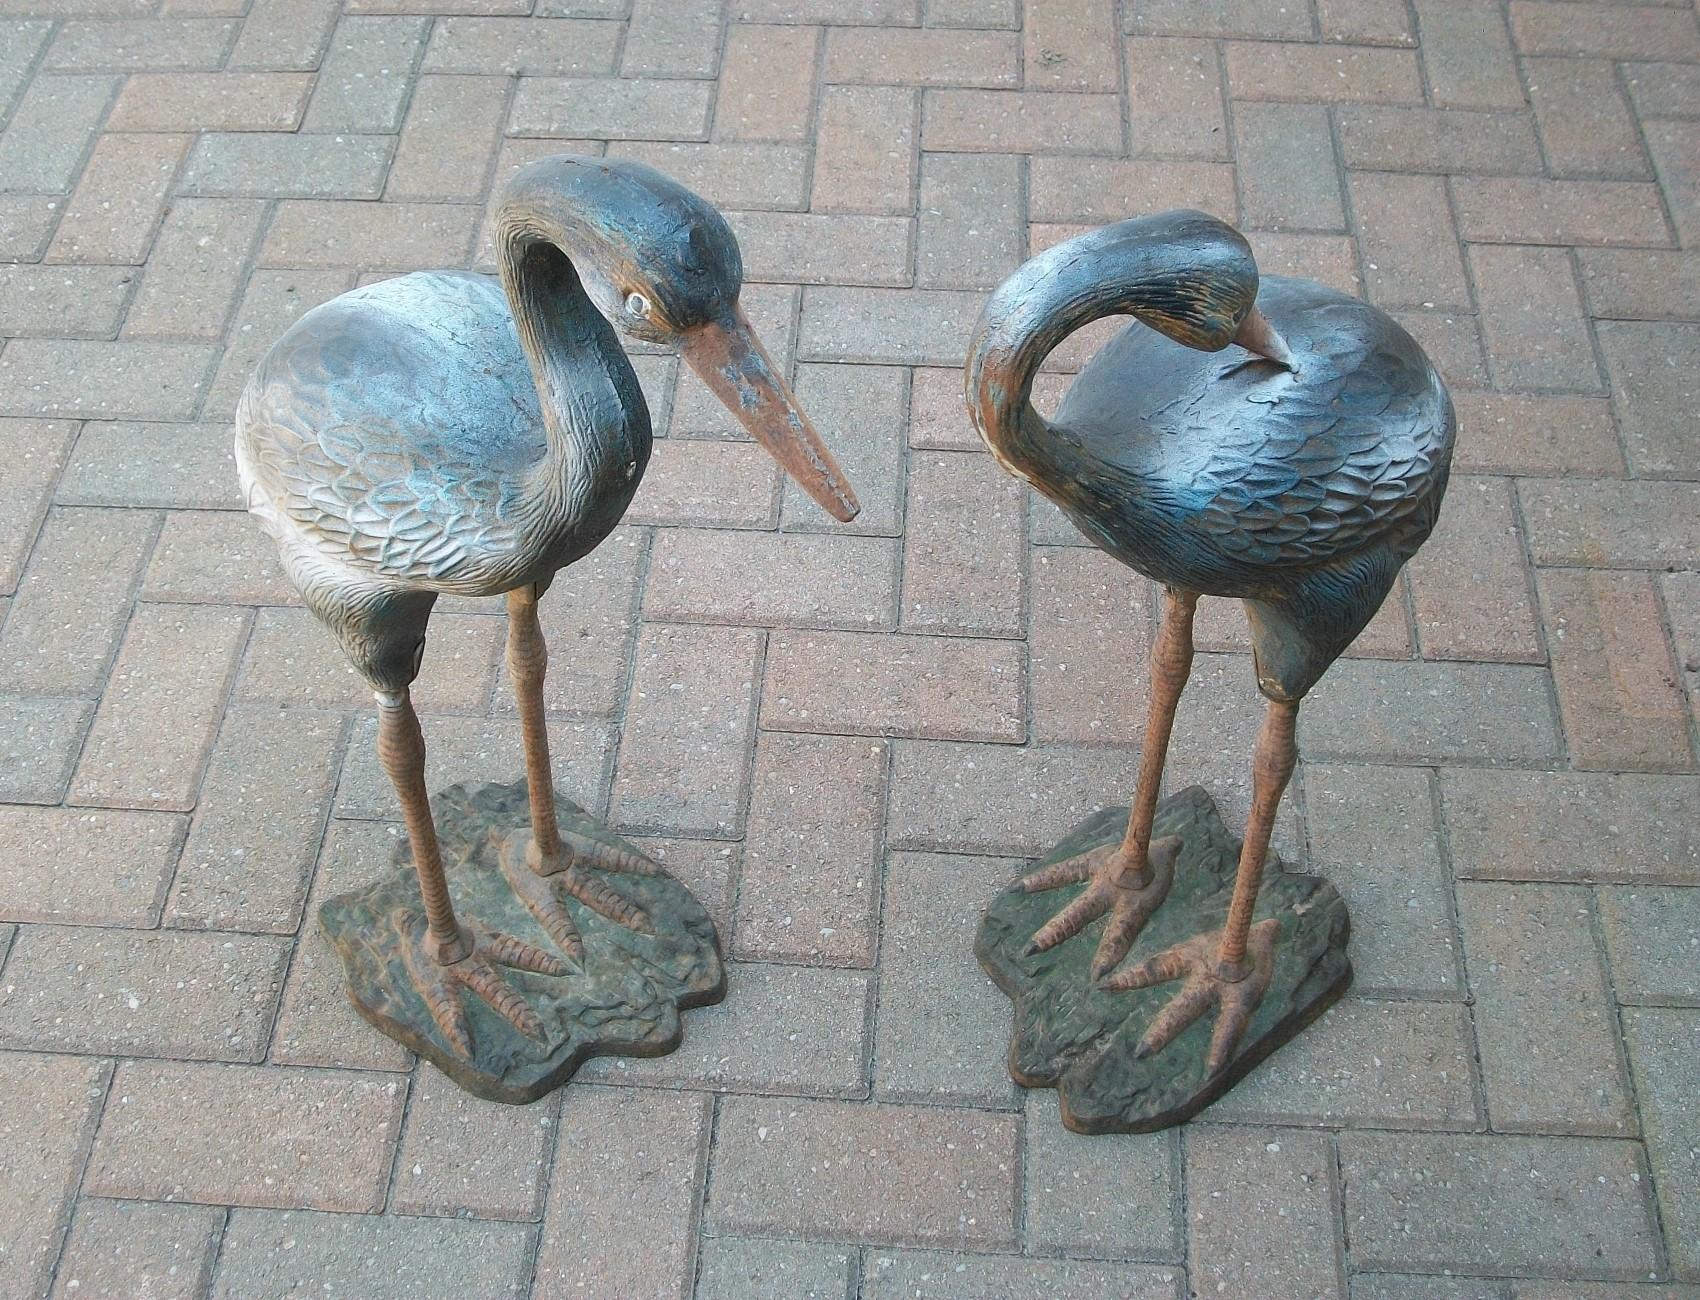 Vintage pair of cast iron 'Heron' garden sculptures - suitable for indoor/outdoor use - featuring a great aged patina with remnants of a polychrome painted finish in areas - articulated details to the body, wings, legs and base - each bird cast in